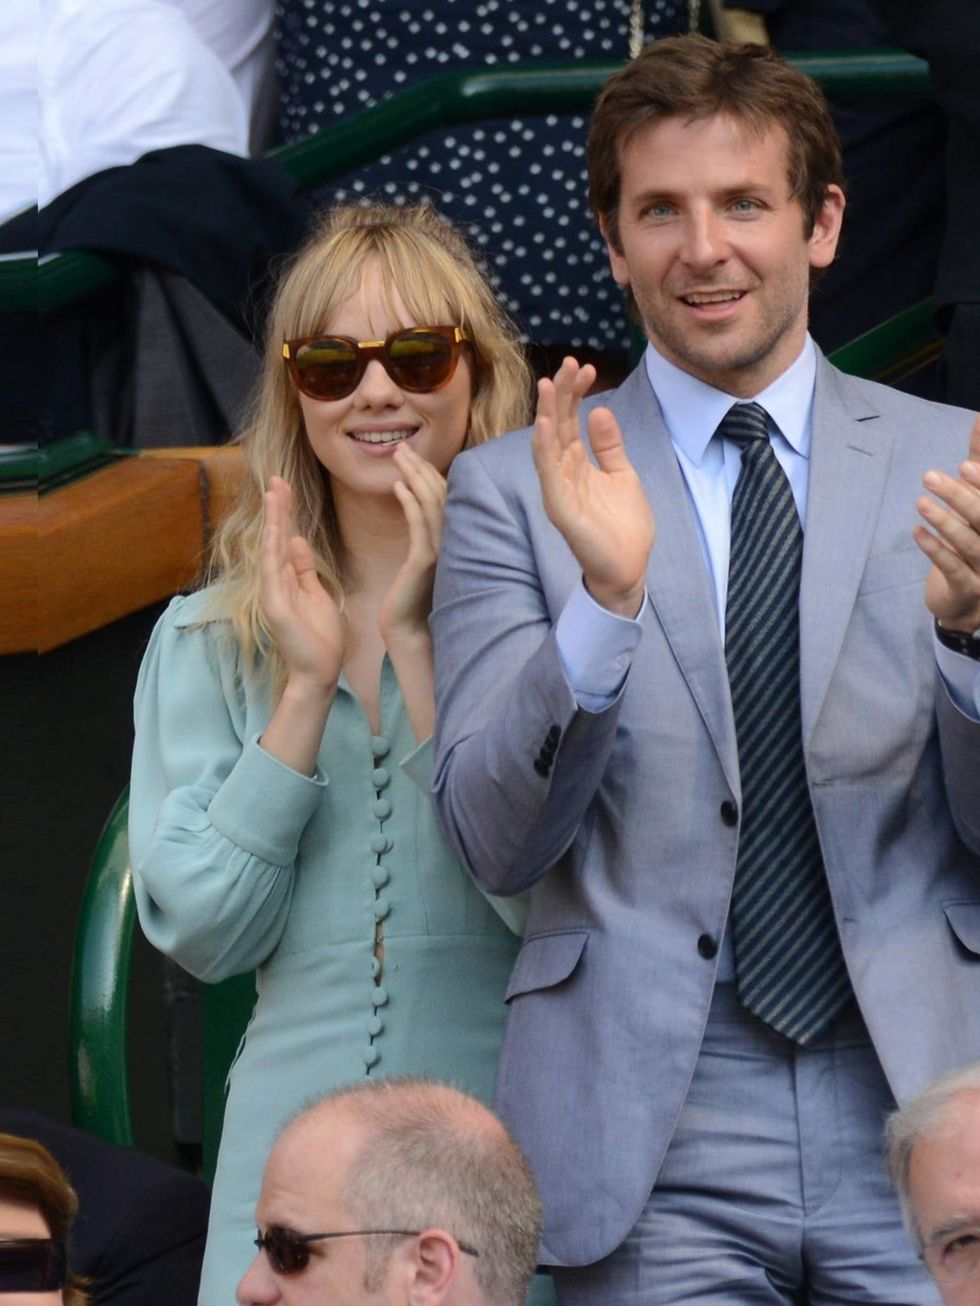 <p><a href="http://www.elleuk.com/elle-style-awards/news/bradley-cooper-best-actor-2013">Bradley Cooper</a> and Suki Waterhouse at the Men's Singles Final between Novak Djokovic and Andy Murray on Day 13 of Wimbledon, London, July 2013.</p>